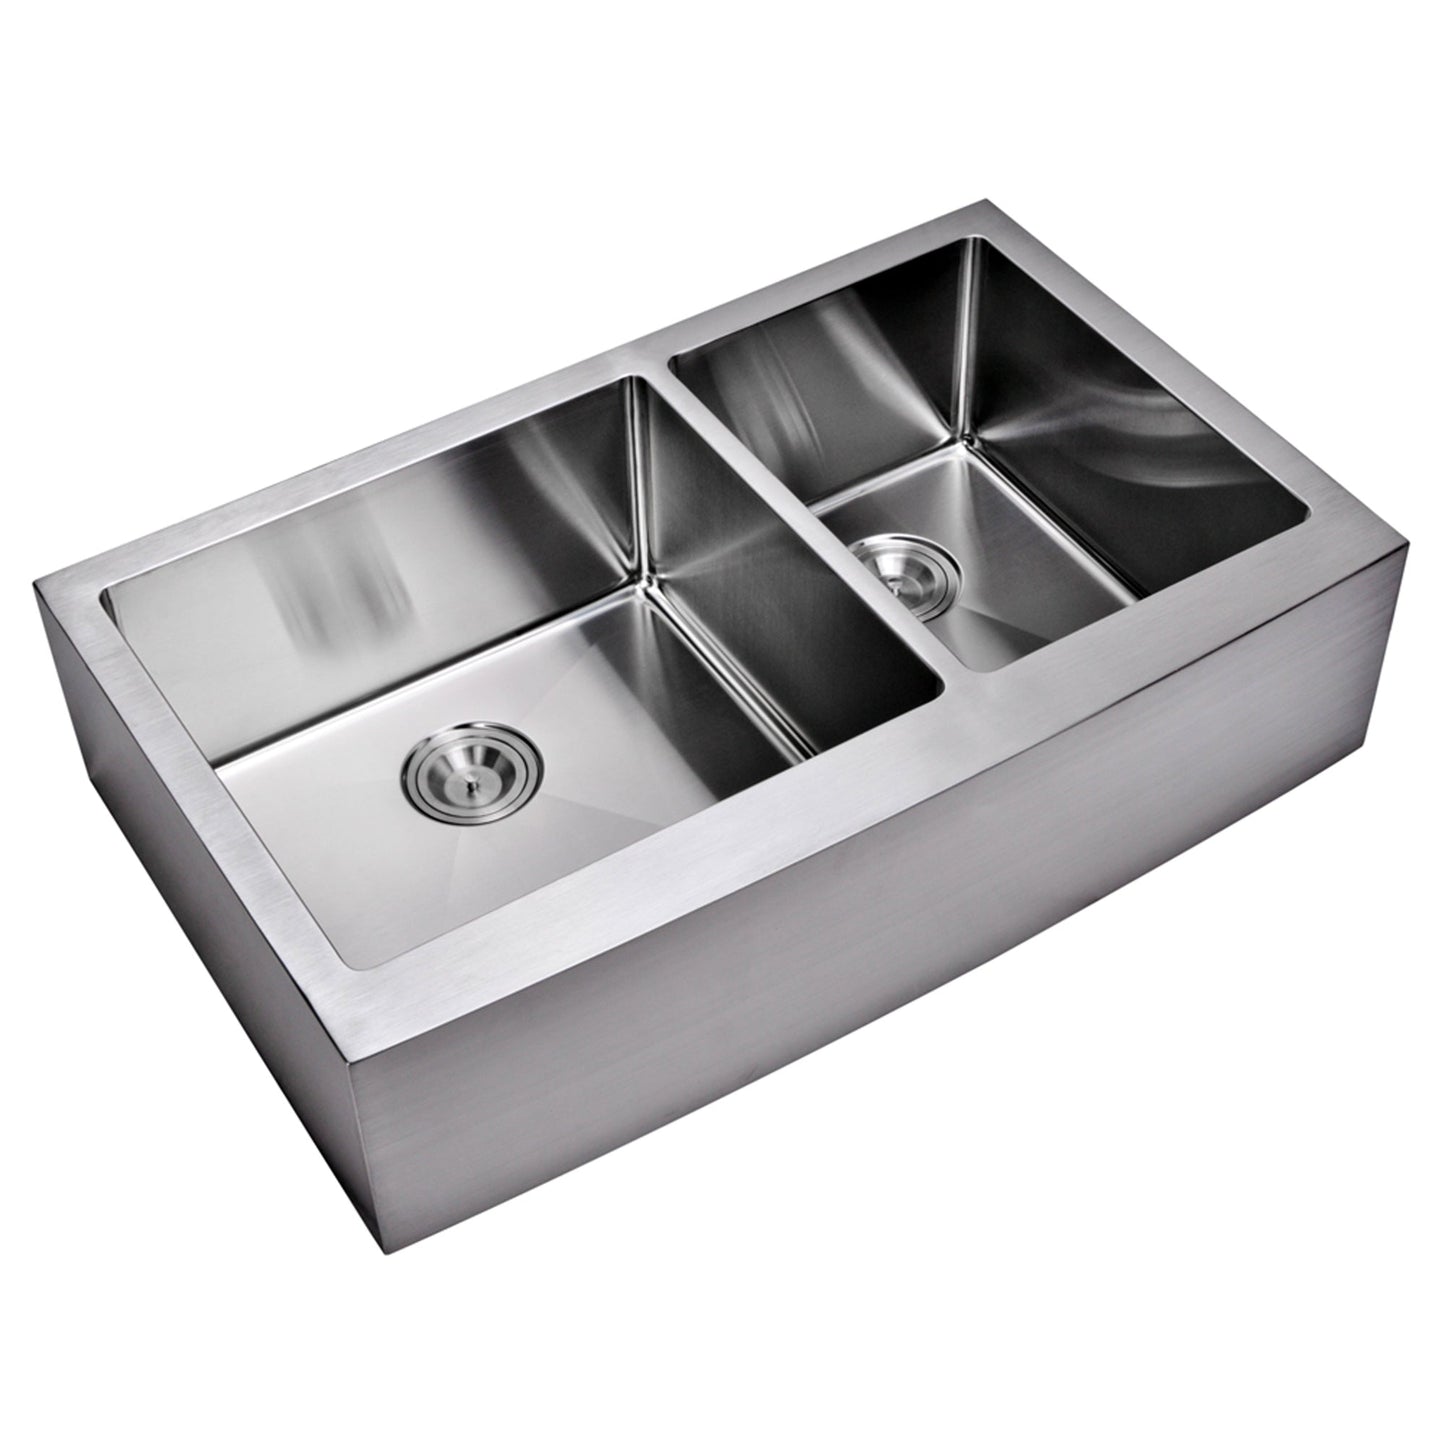 36 Inch X 22 Inch 15mm Corner Radius 60/40 Double Bowl Stainless Steel Hand Made Apron Front Kitchen Sink With Drains, Strainers, And Bottom Grids